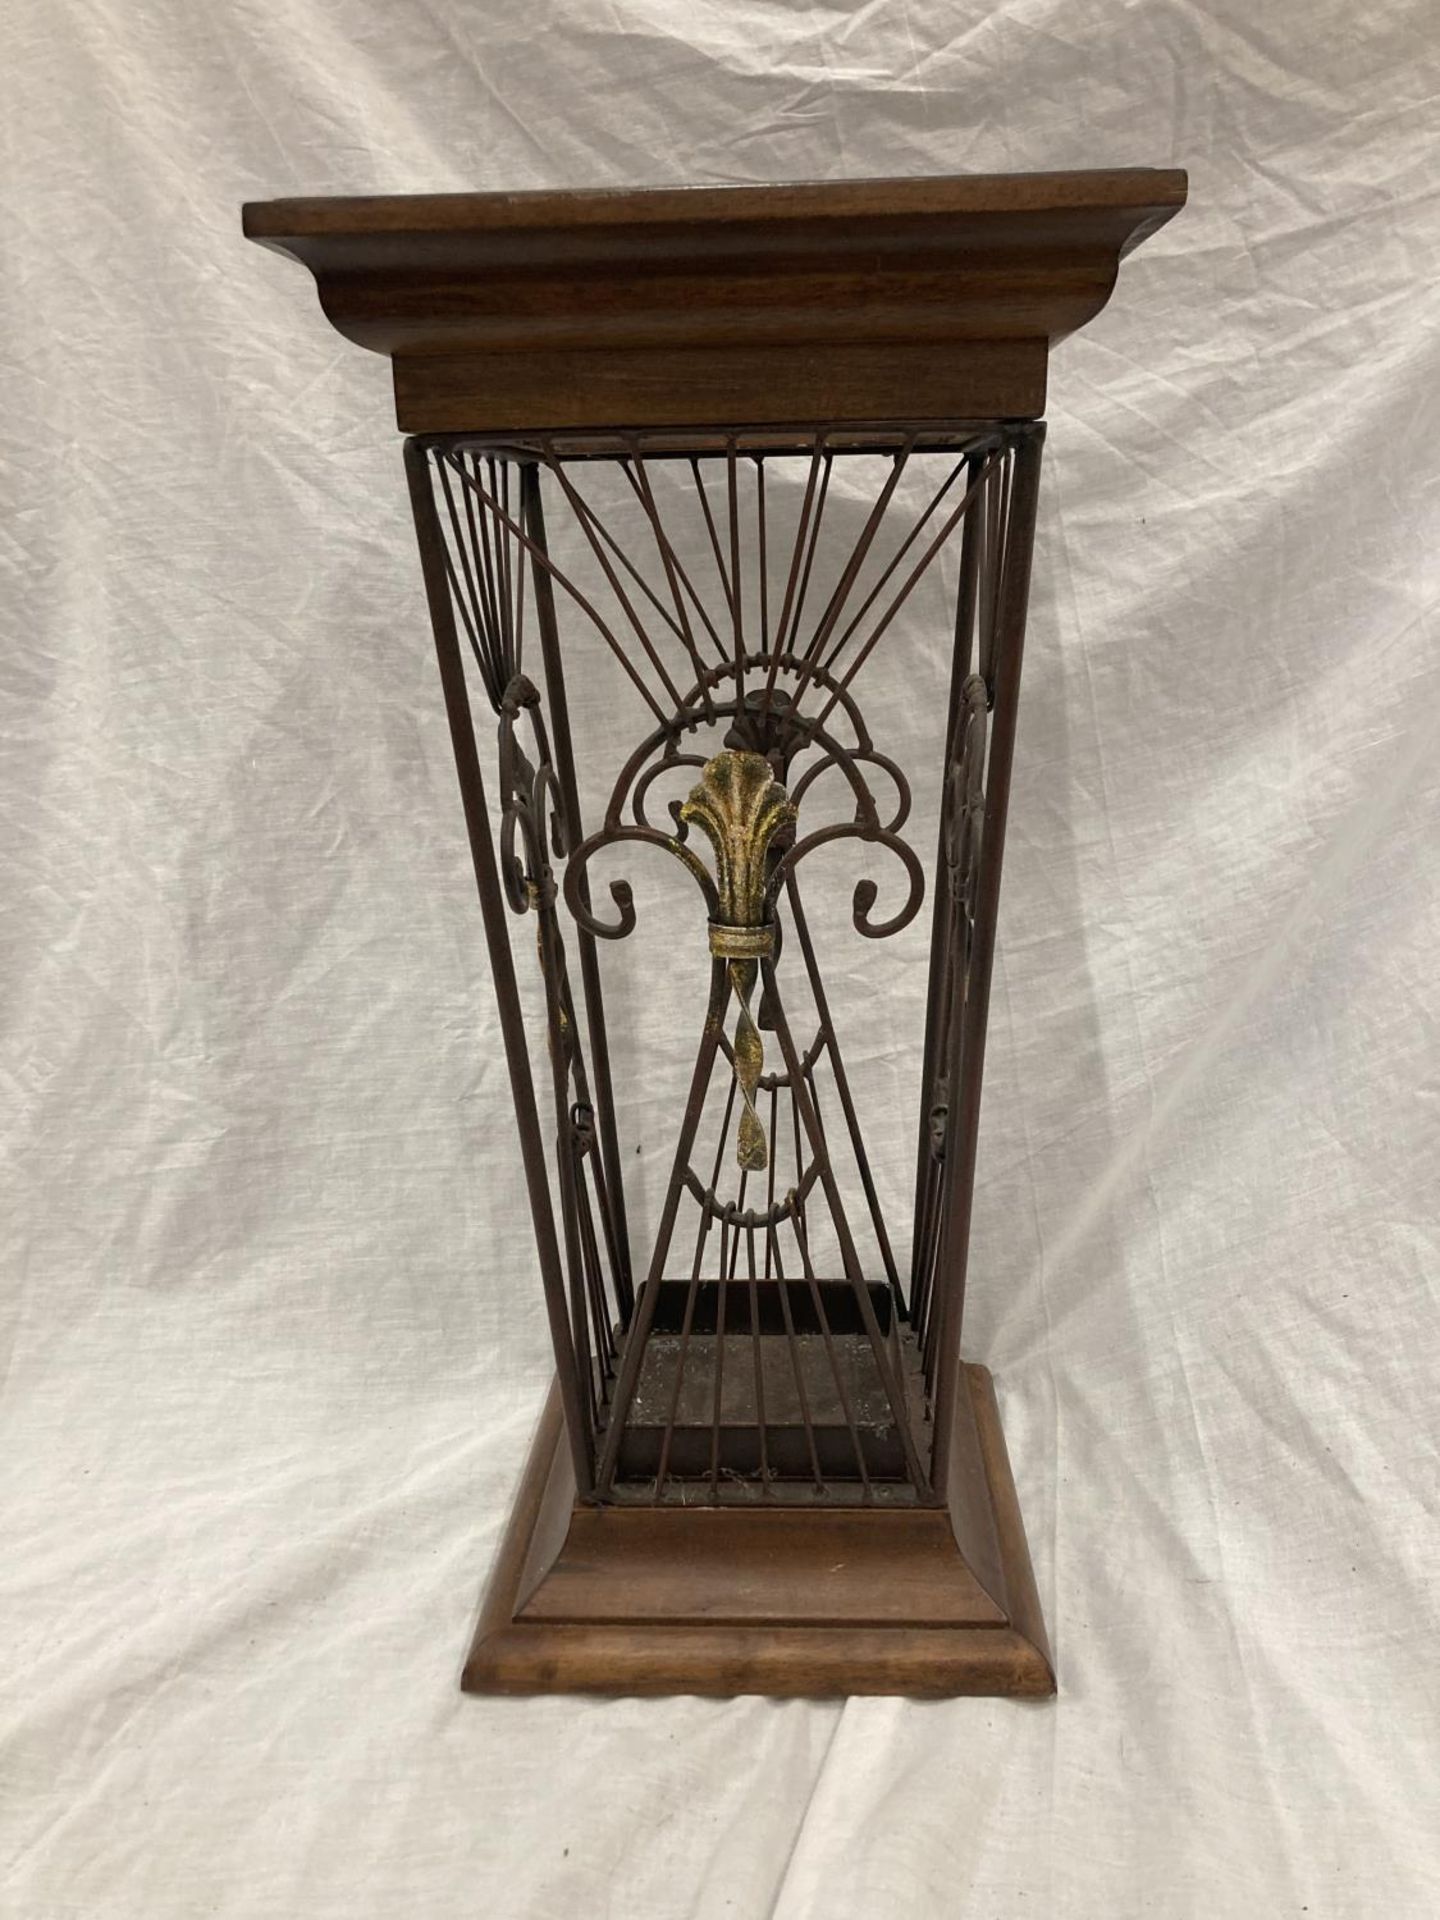 A VINTAGE STYLE WOOD AND WROUGHT IRON UMBRELLA STAND